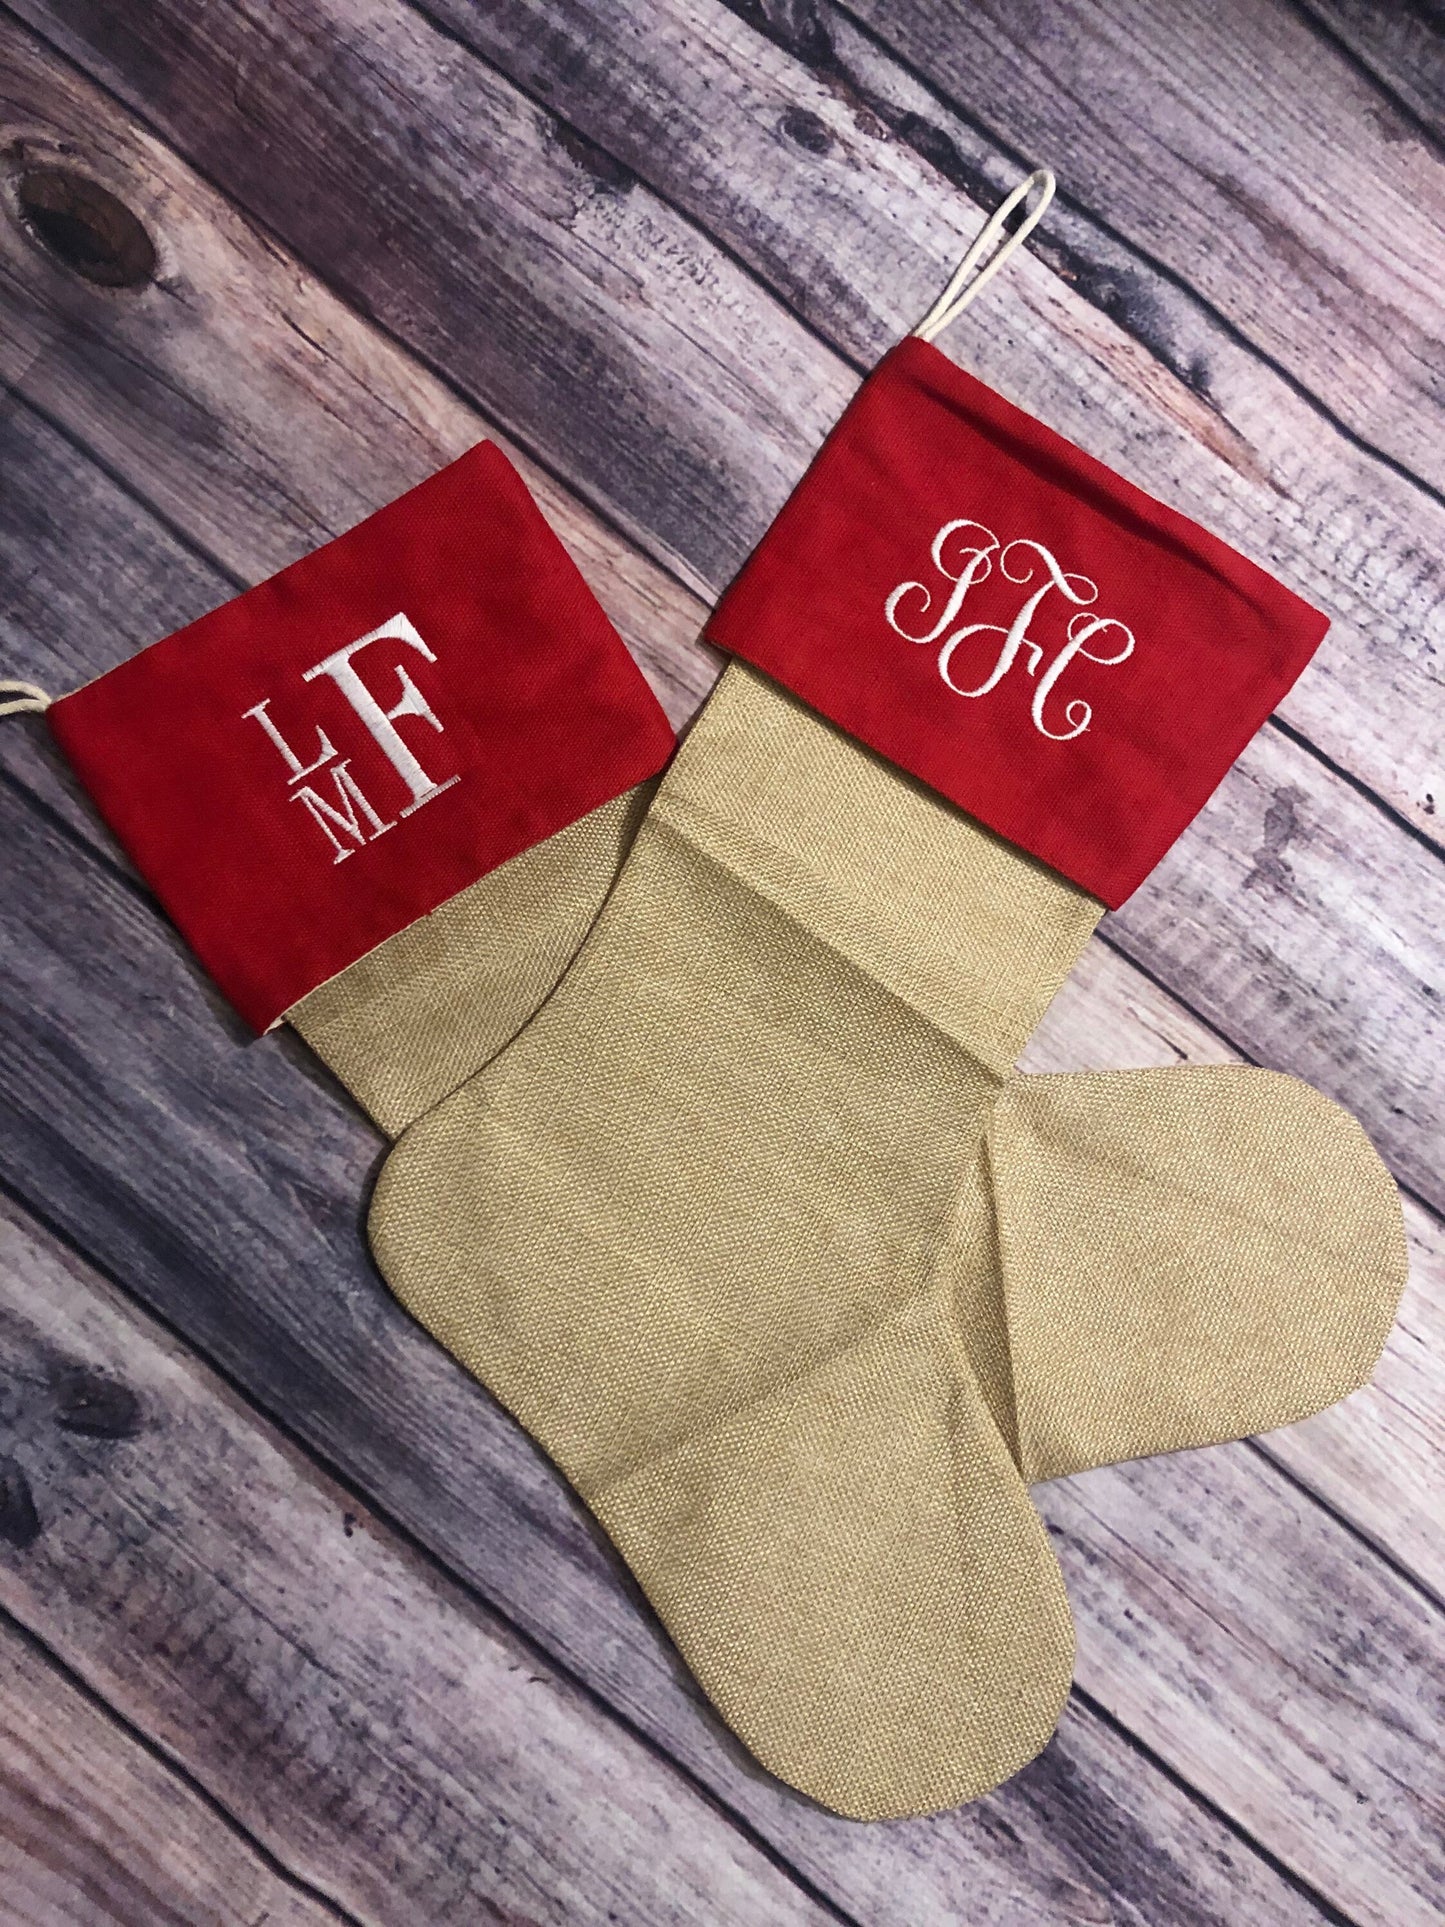 Embroidered Burlap Christmas Stockings with Red Cuff